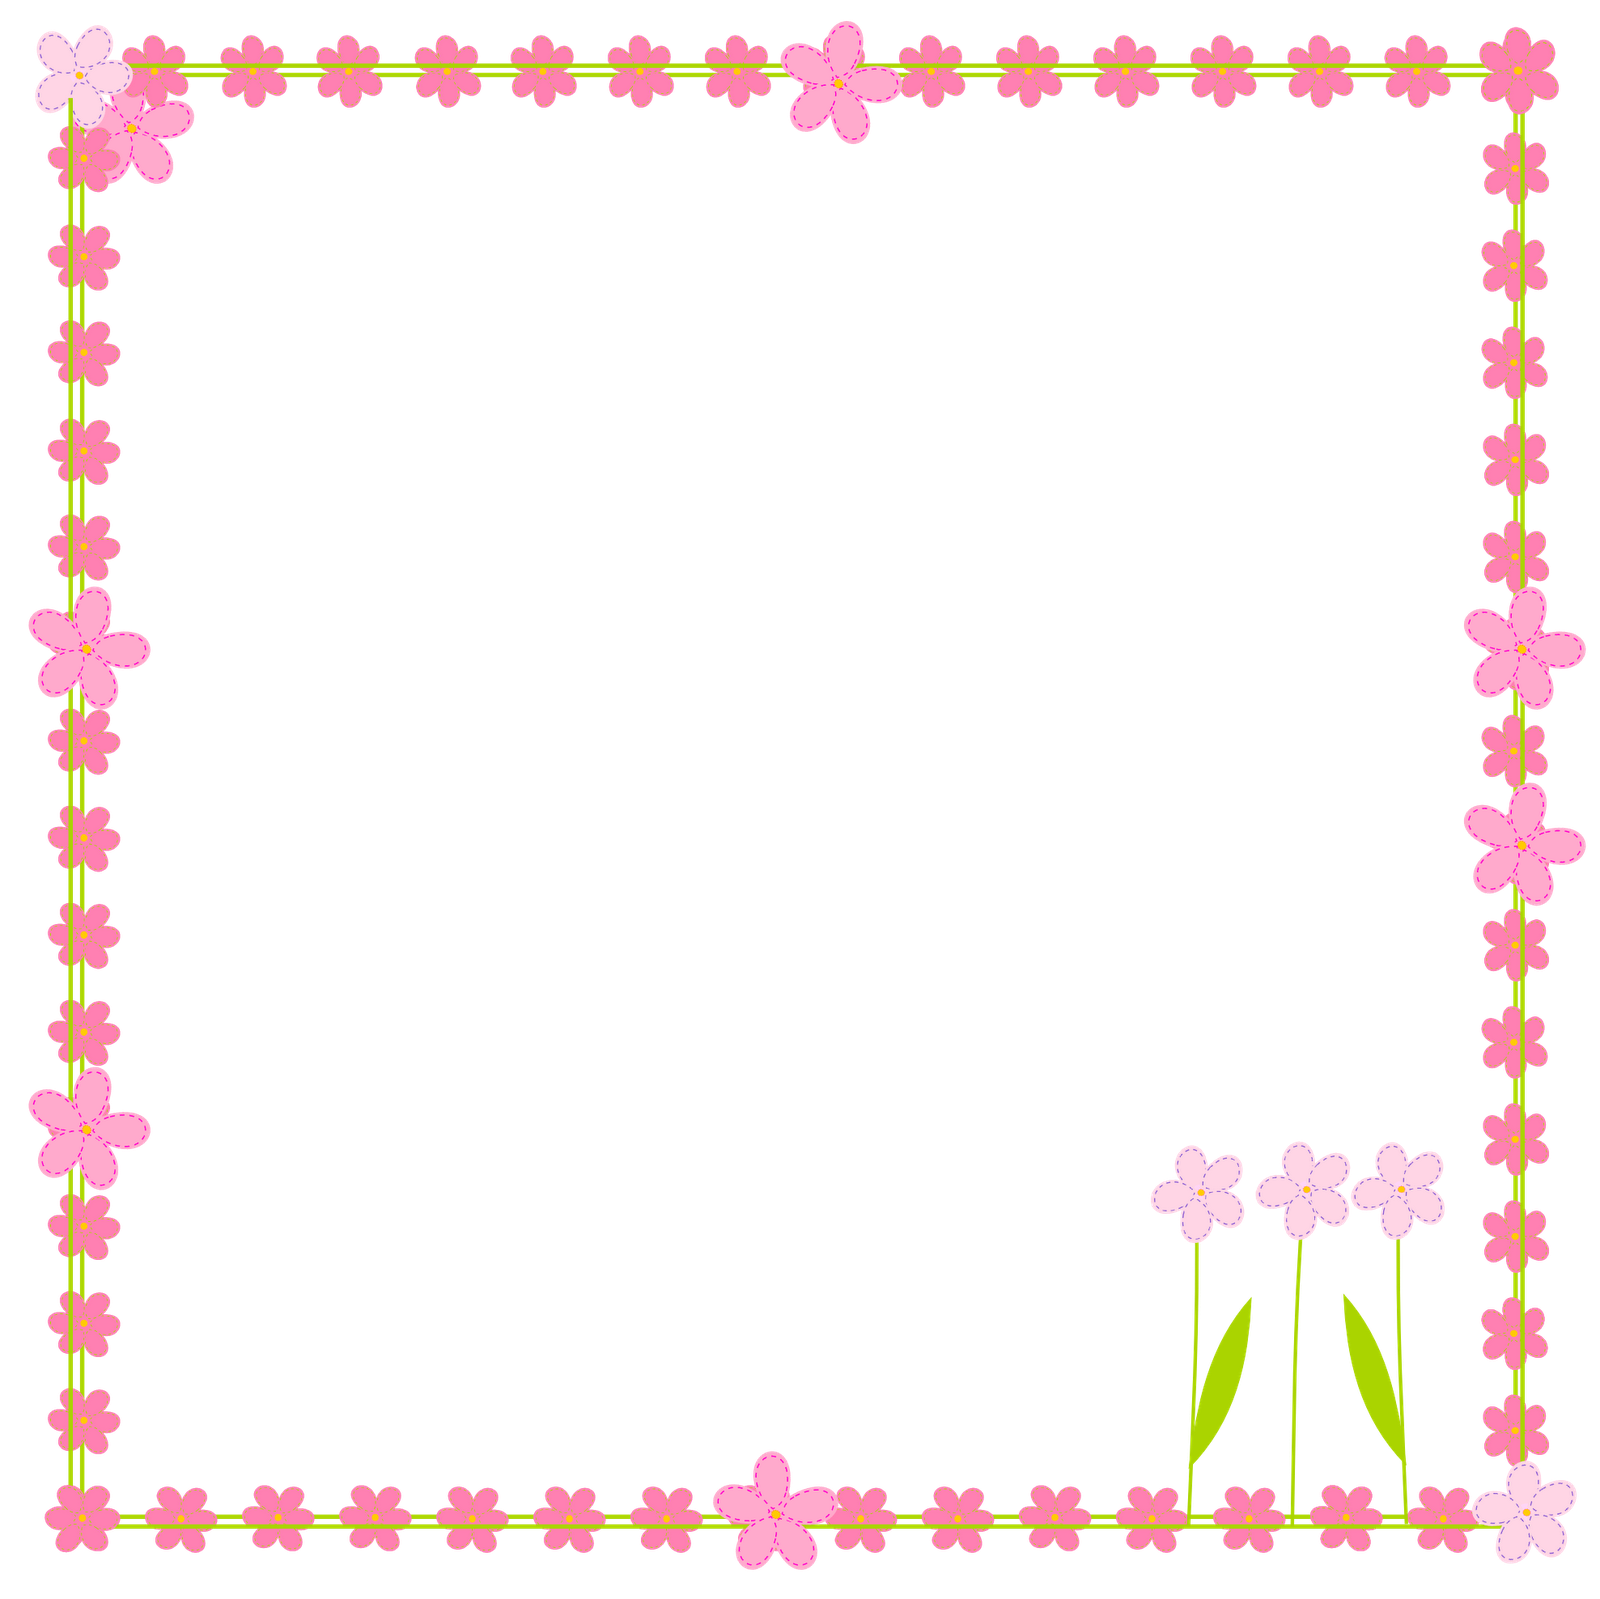 Clip Art Borders And Frames Clipart